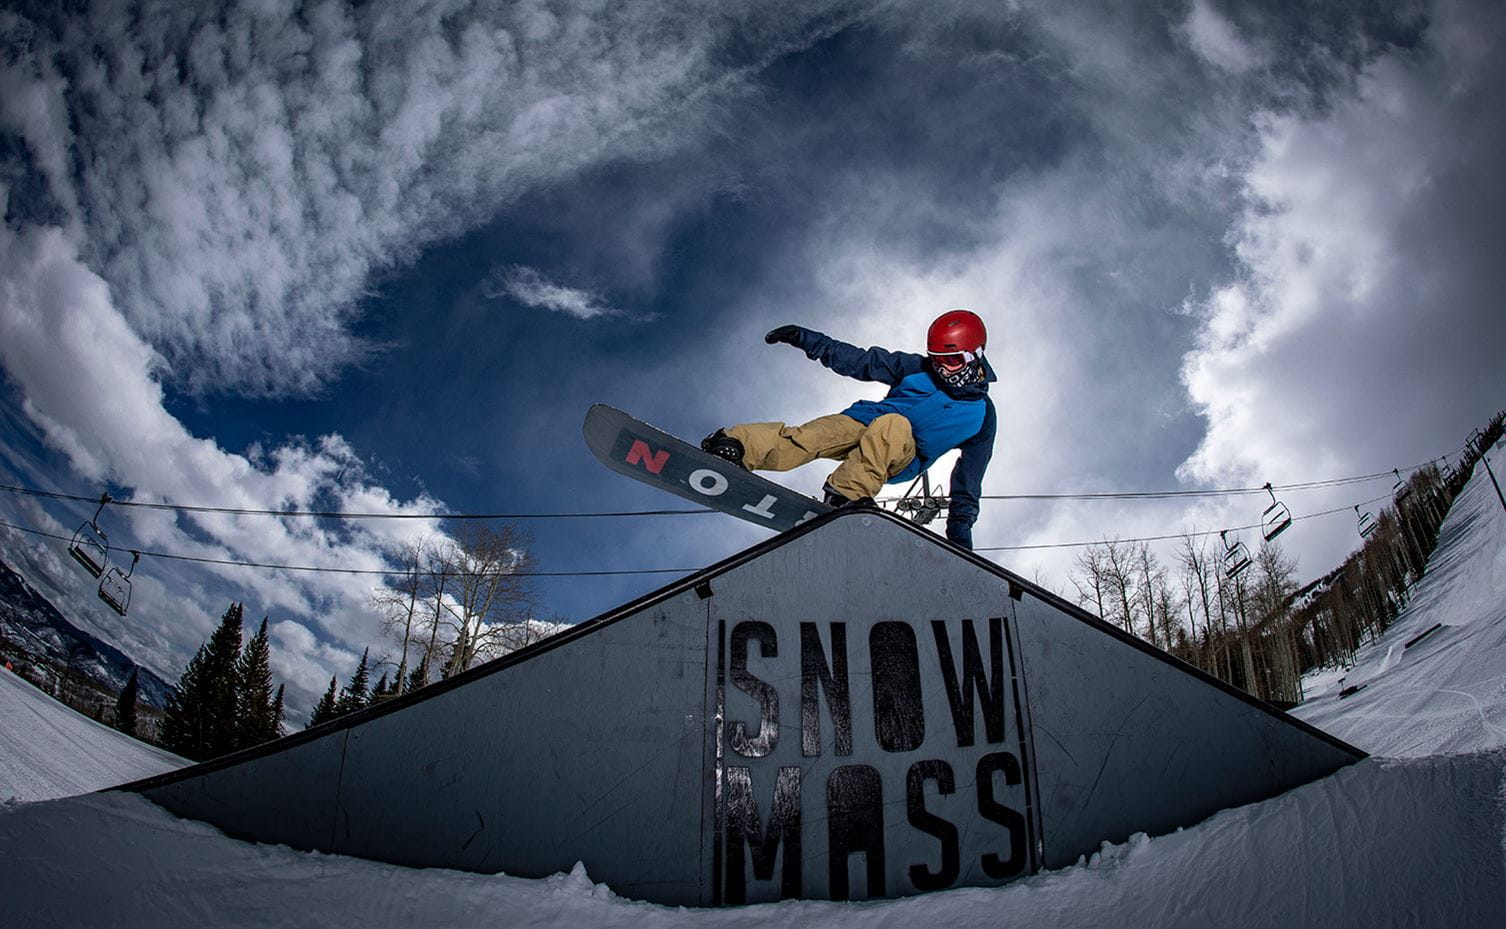 A snowboarder enjoys the pipes and rails and ramps at Snowmass